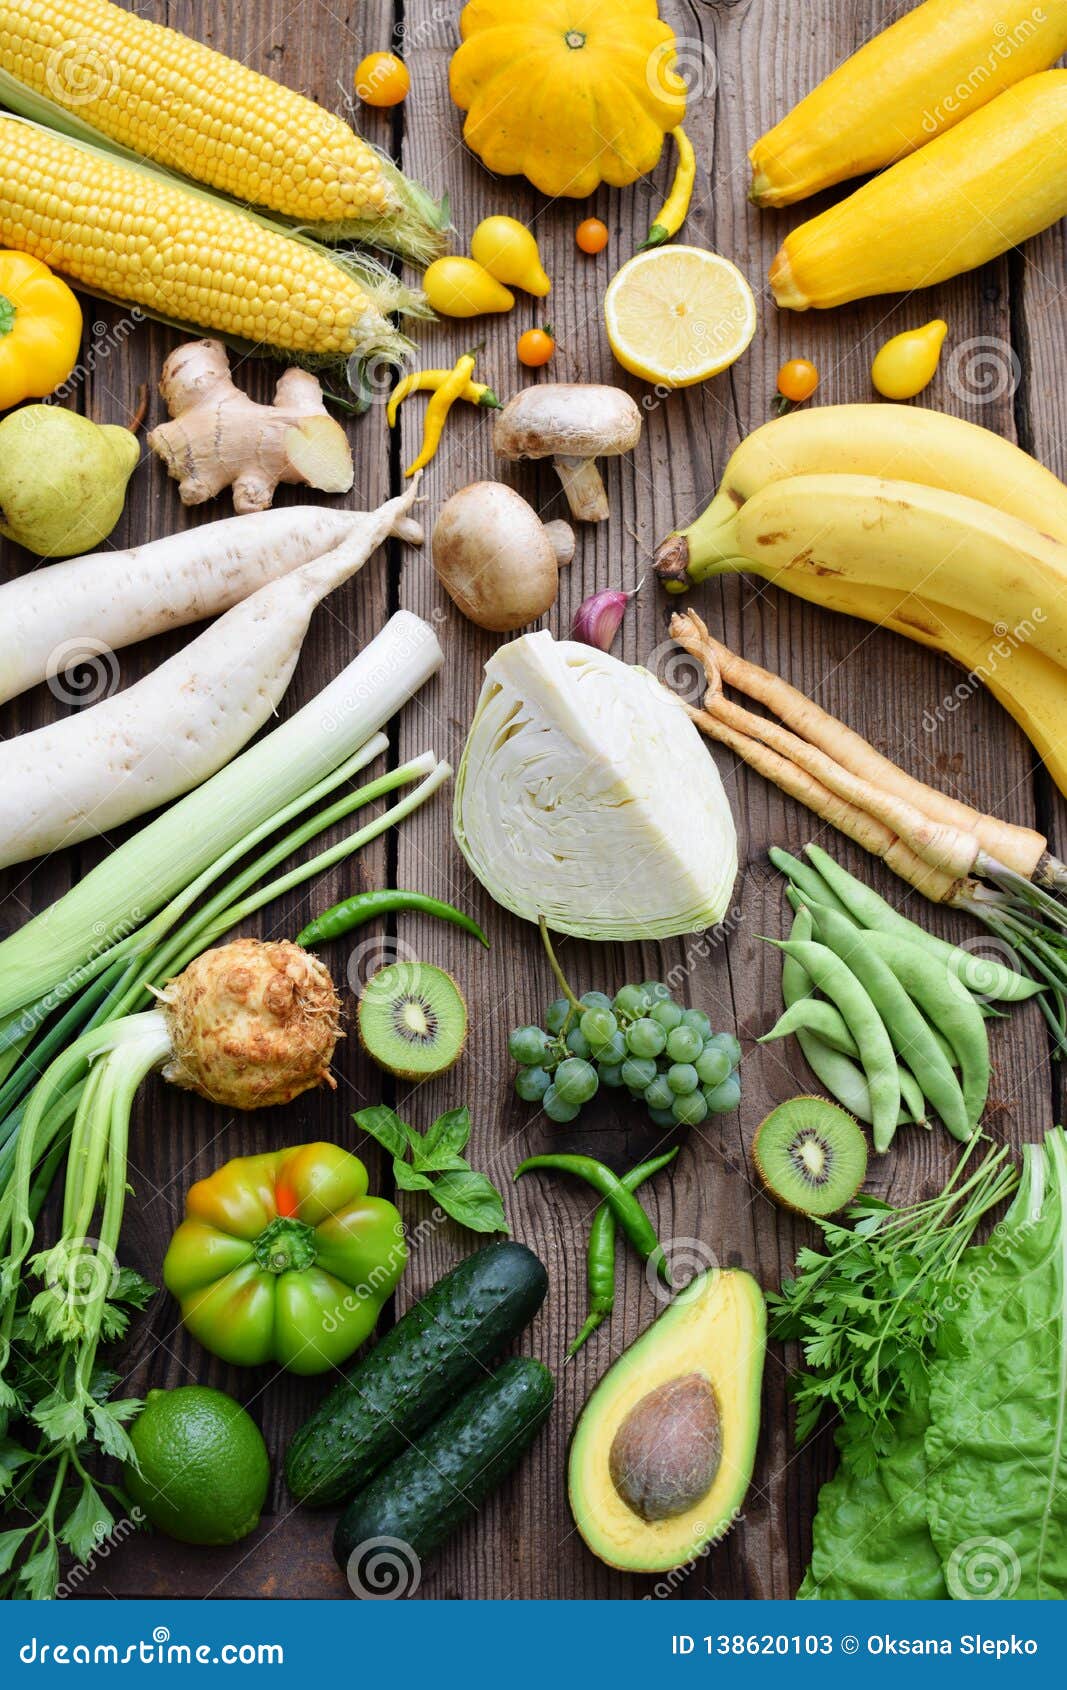 White, Green, Yellow Fruits And Vegetables On Wooden Background ...